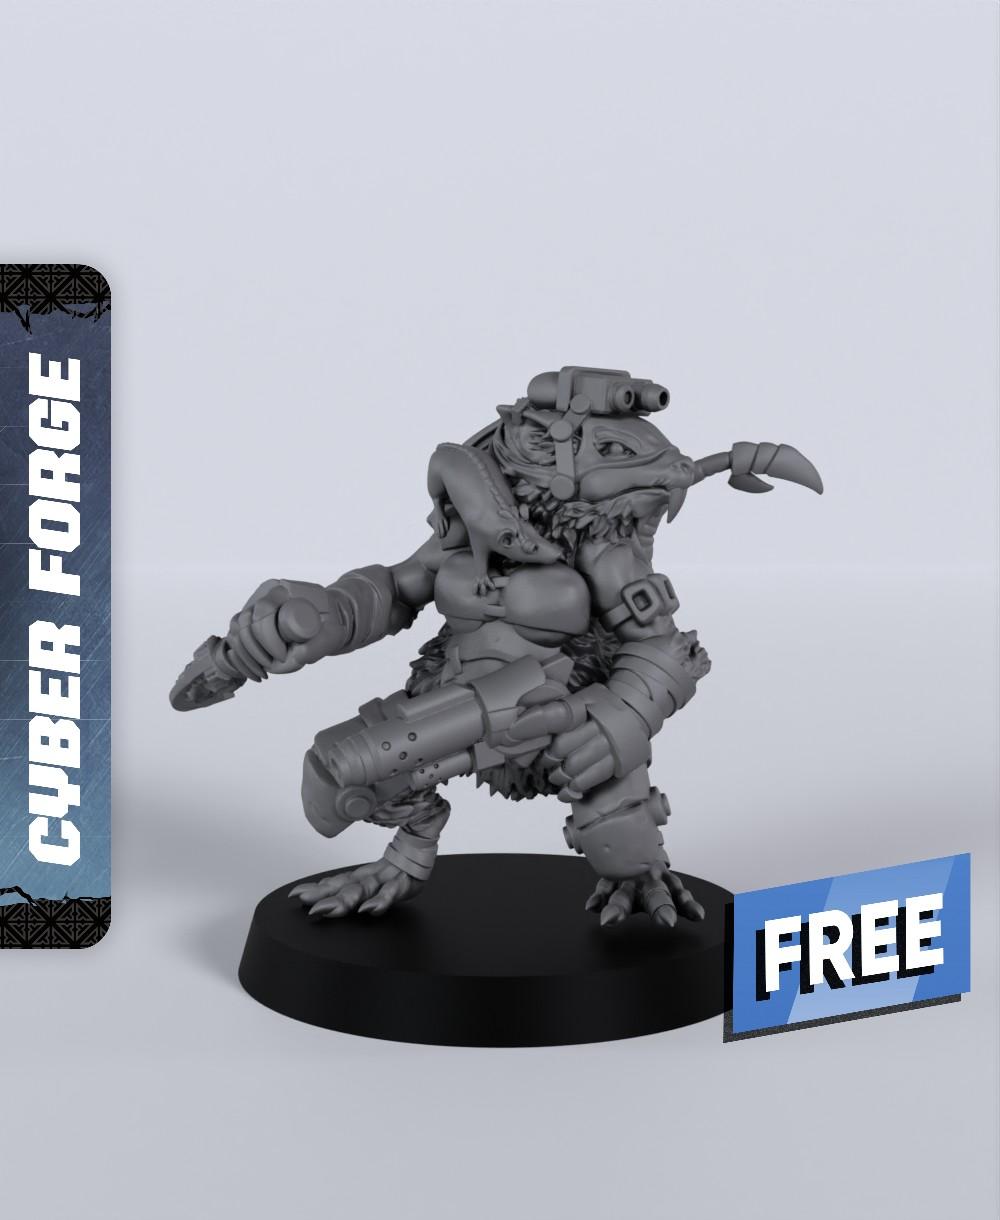 Shhandra - With Free Cyberpunk Dragon Warhammer - 40k Sci-Fi Gift Ideas for RPG and Wargamers 3d model